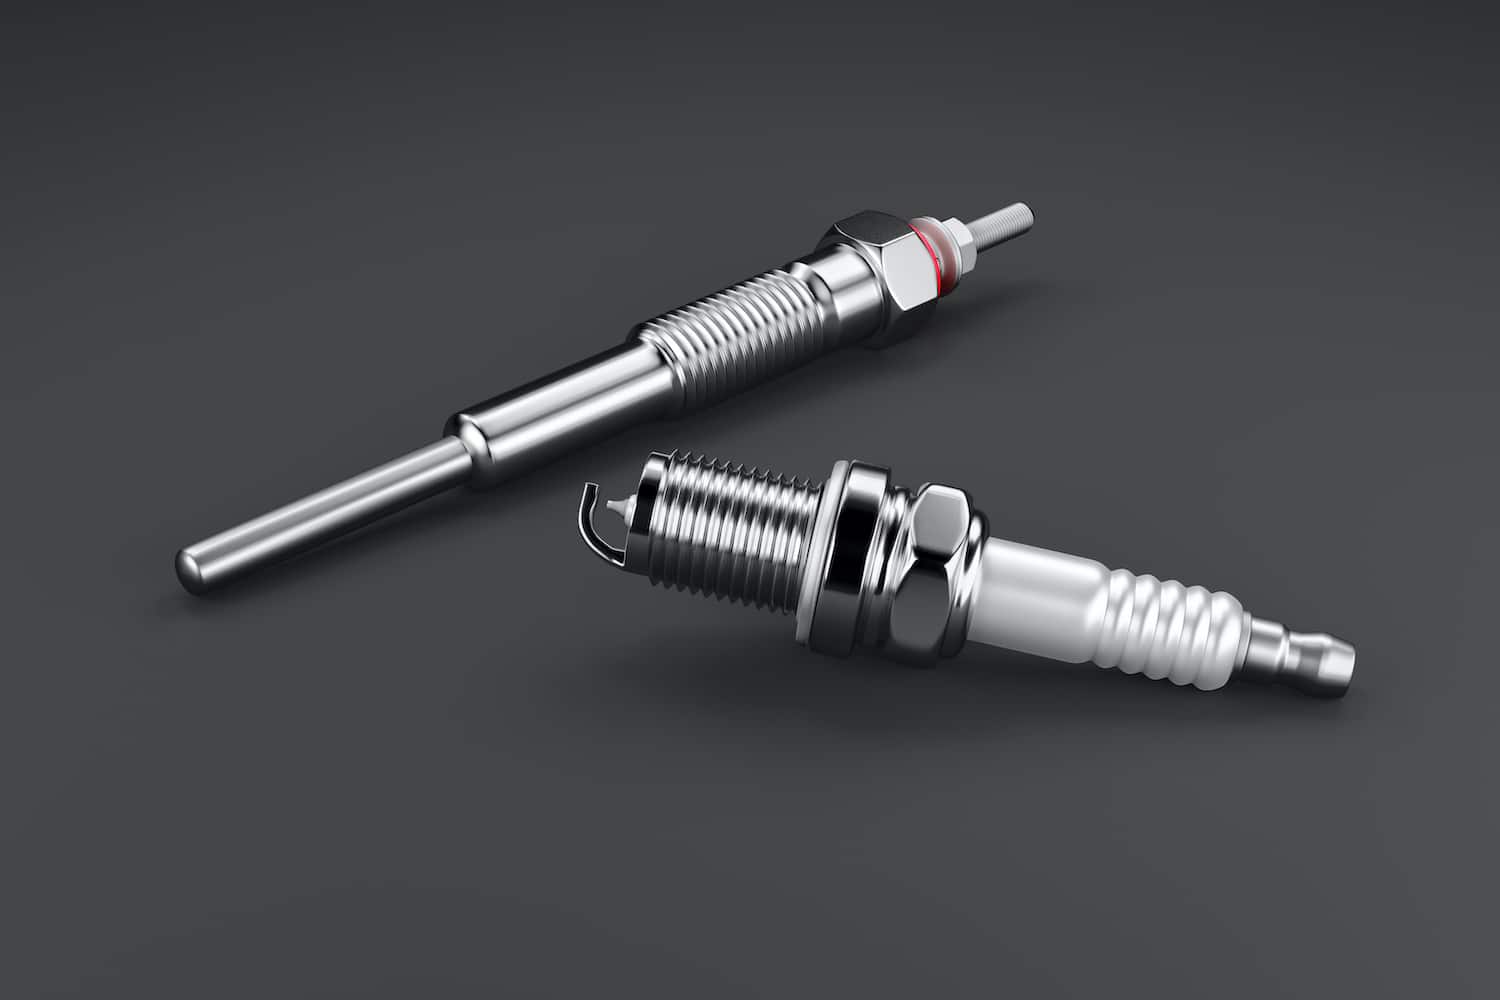 What Are The Differences Between Glow Plugs And Spark Plugs?